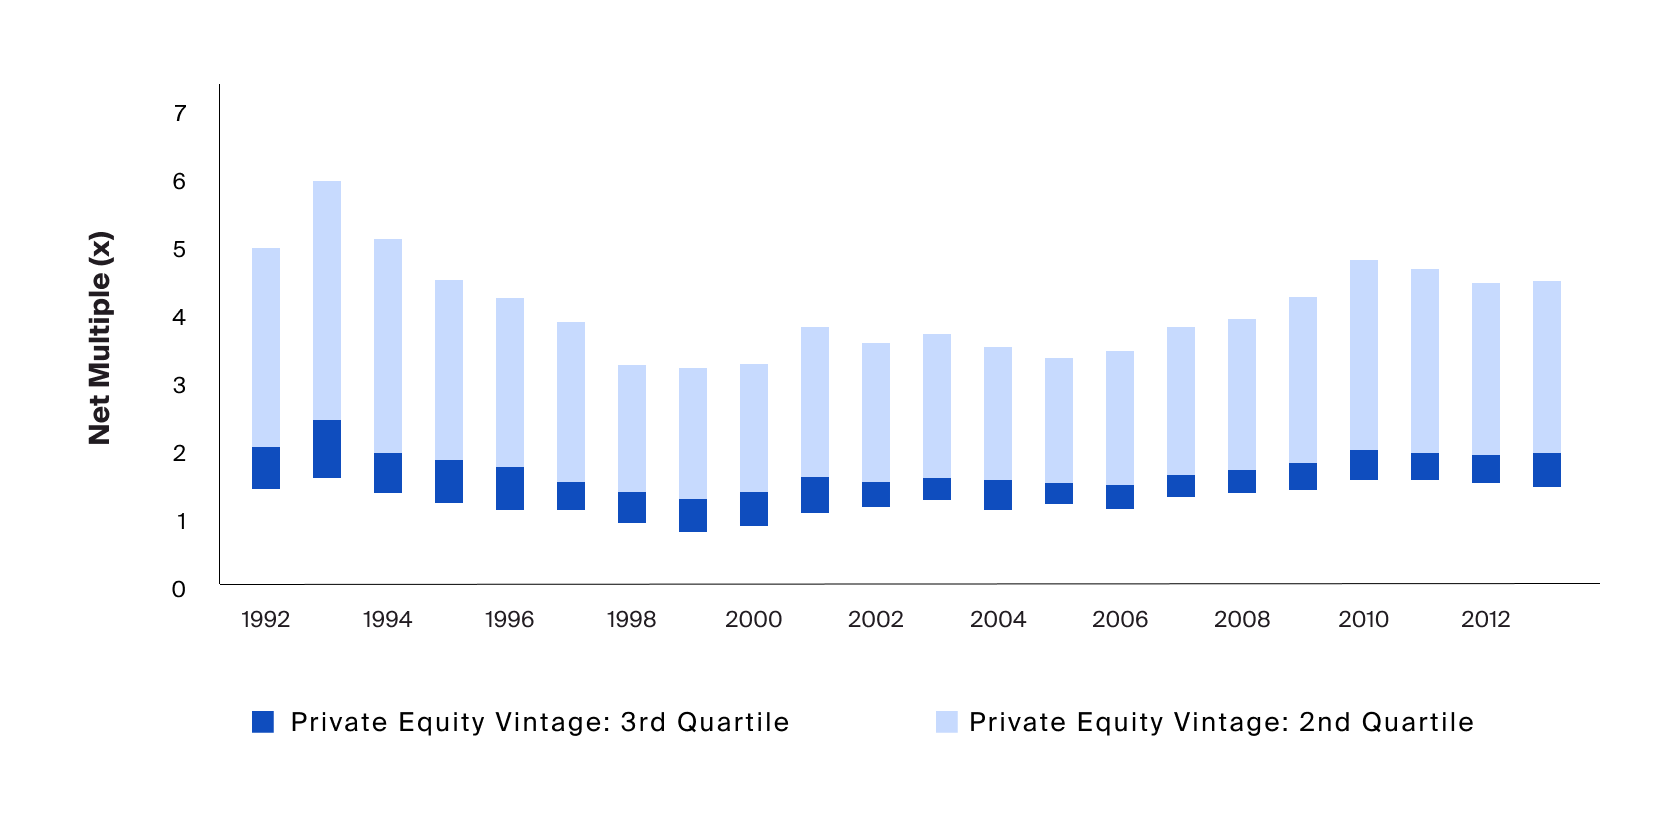 Private equity performance varies across vintages, signifying the potential importance of timing as contributor to ultimate fund return (Exhibit 1)